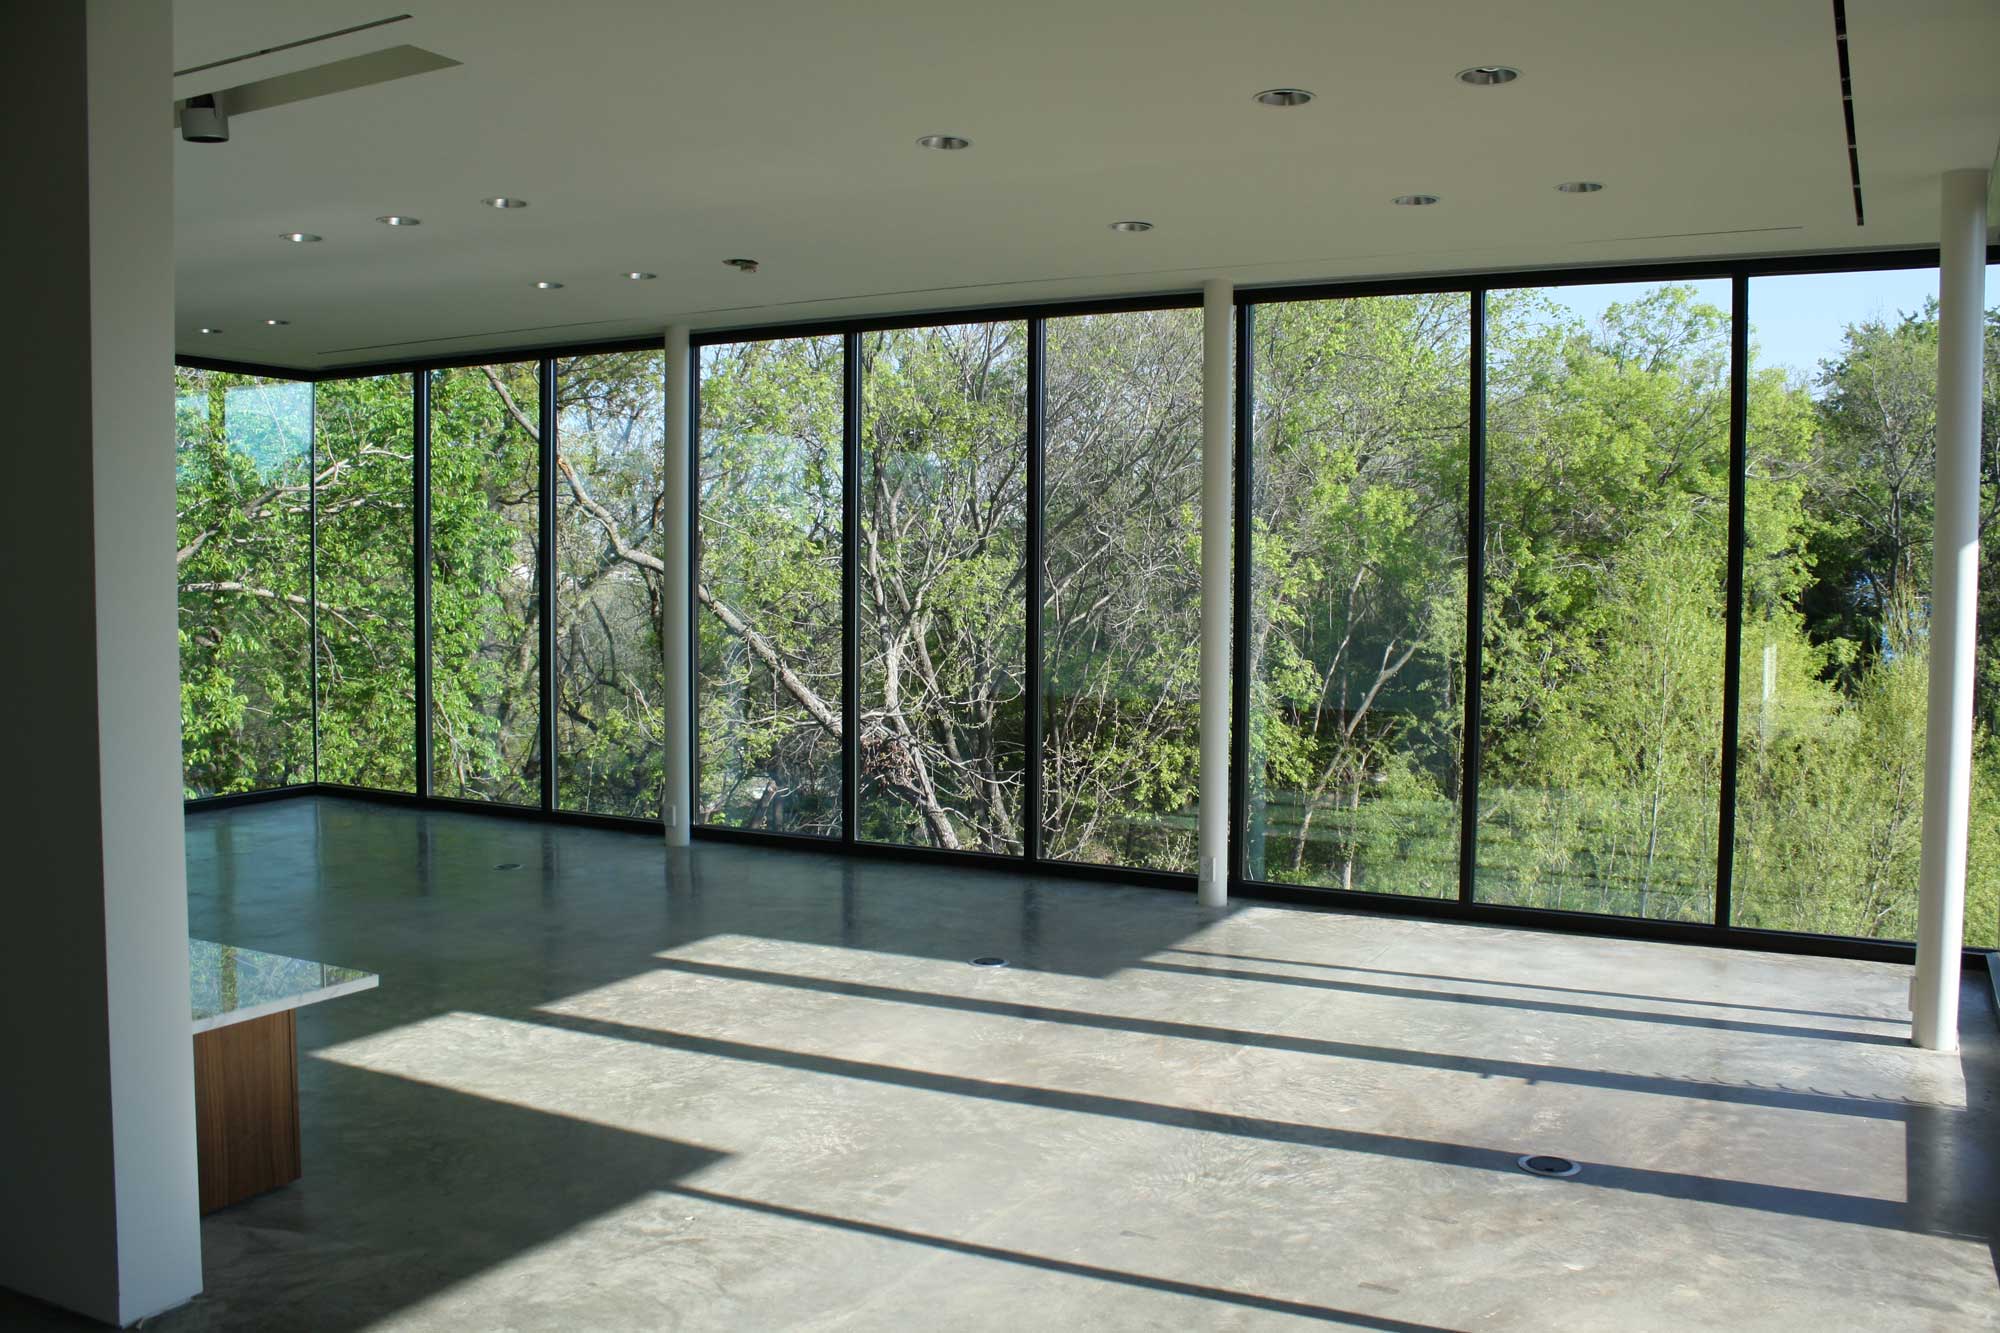 Floor to ceiling architectural glass windows